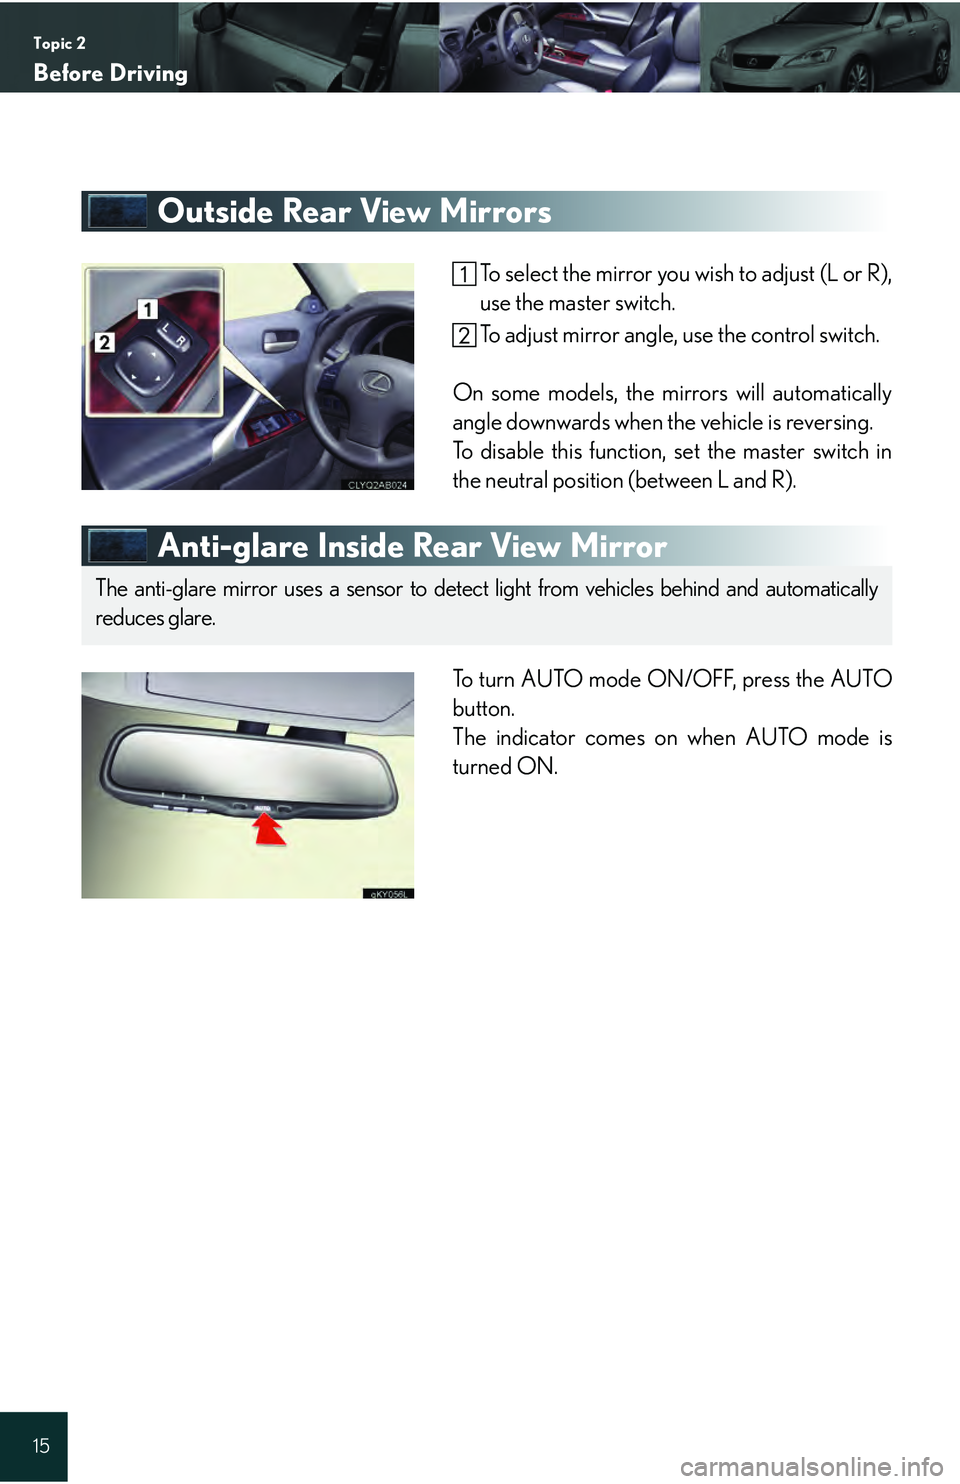 Lexus IS250 2009  Specifications / LEXUS 2009 IS350/250 QUICK GUIDE OWNERS MANUAL (OM53689U) Topic 2
Before Driving
15
Outside Rear View Mirrors
To select the mirror you wish to adjust (L or R),
use the master switch.
To adjust mirror angle, use the control switch.
On some models, the mirrors